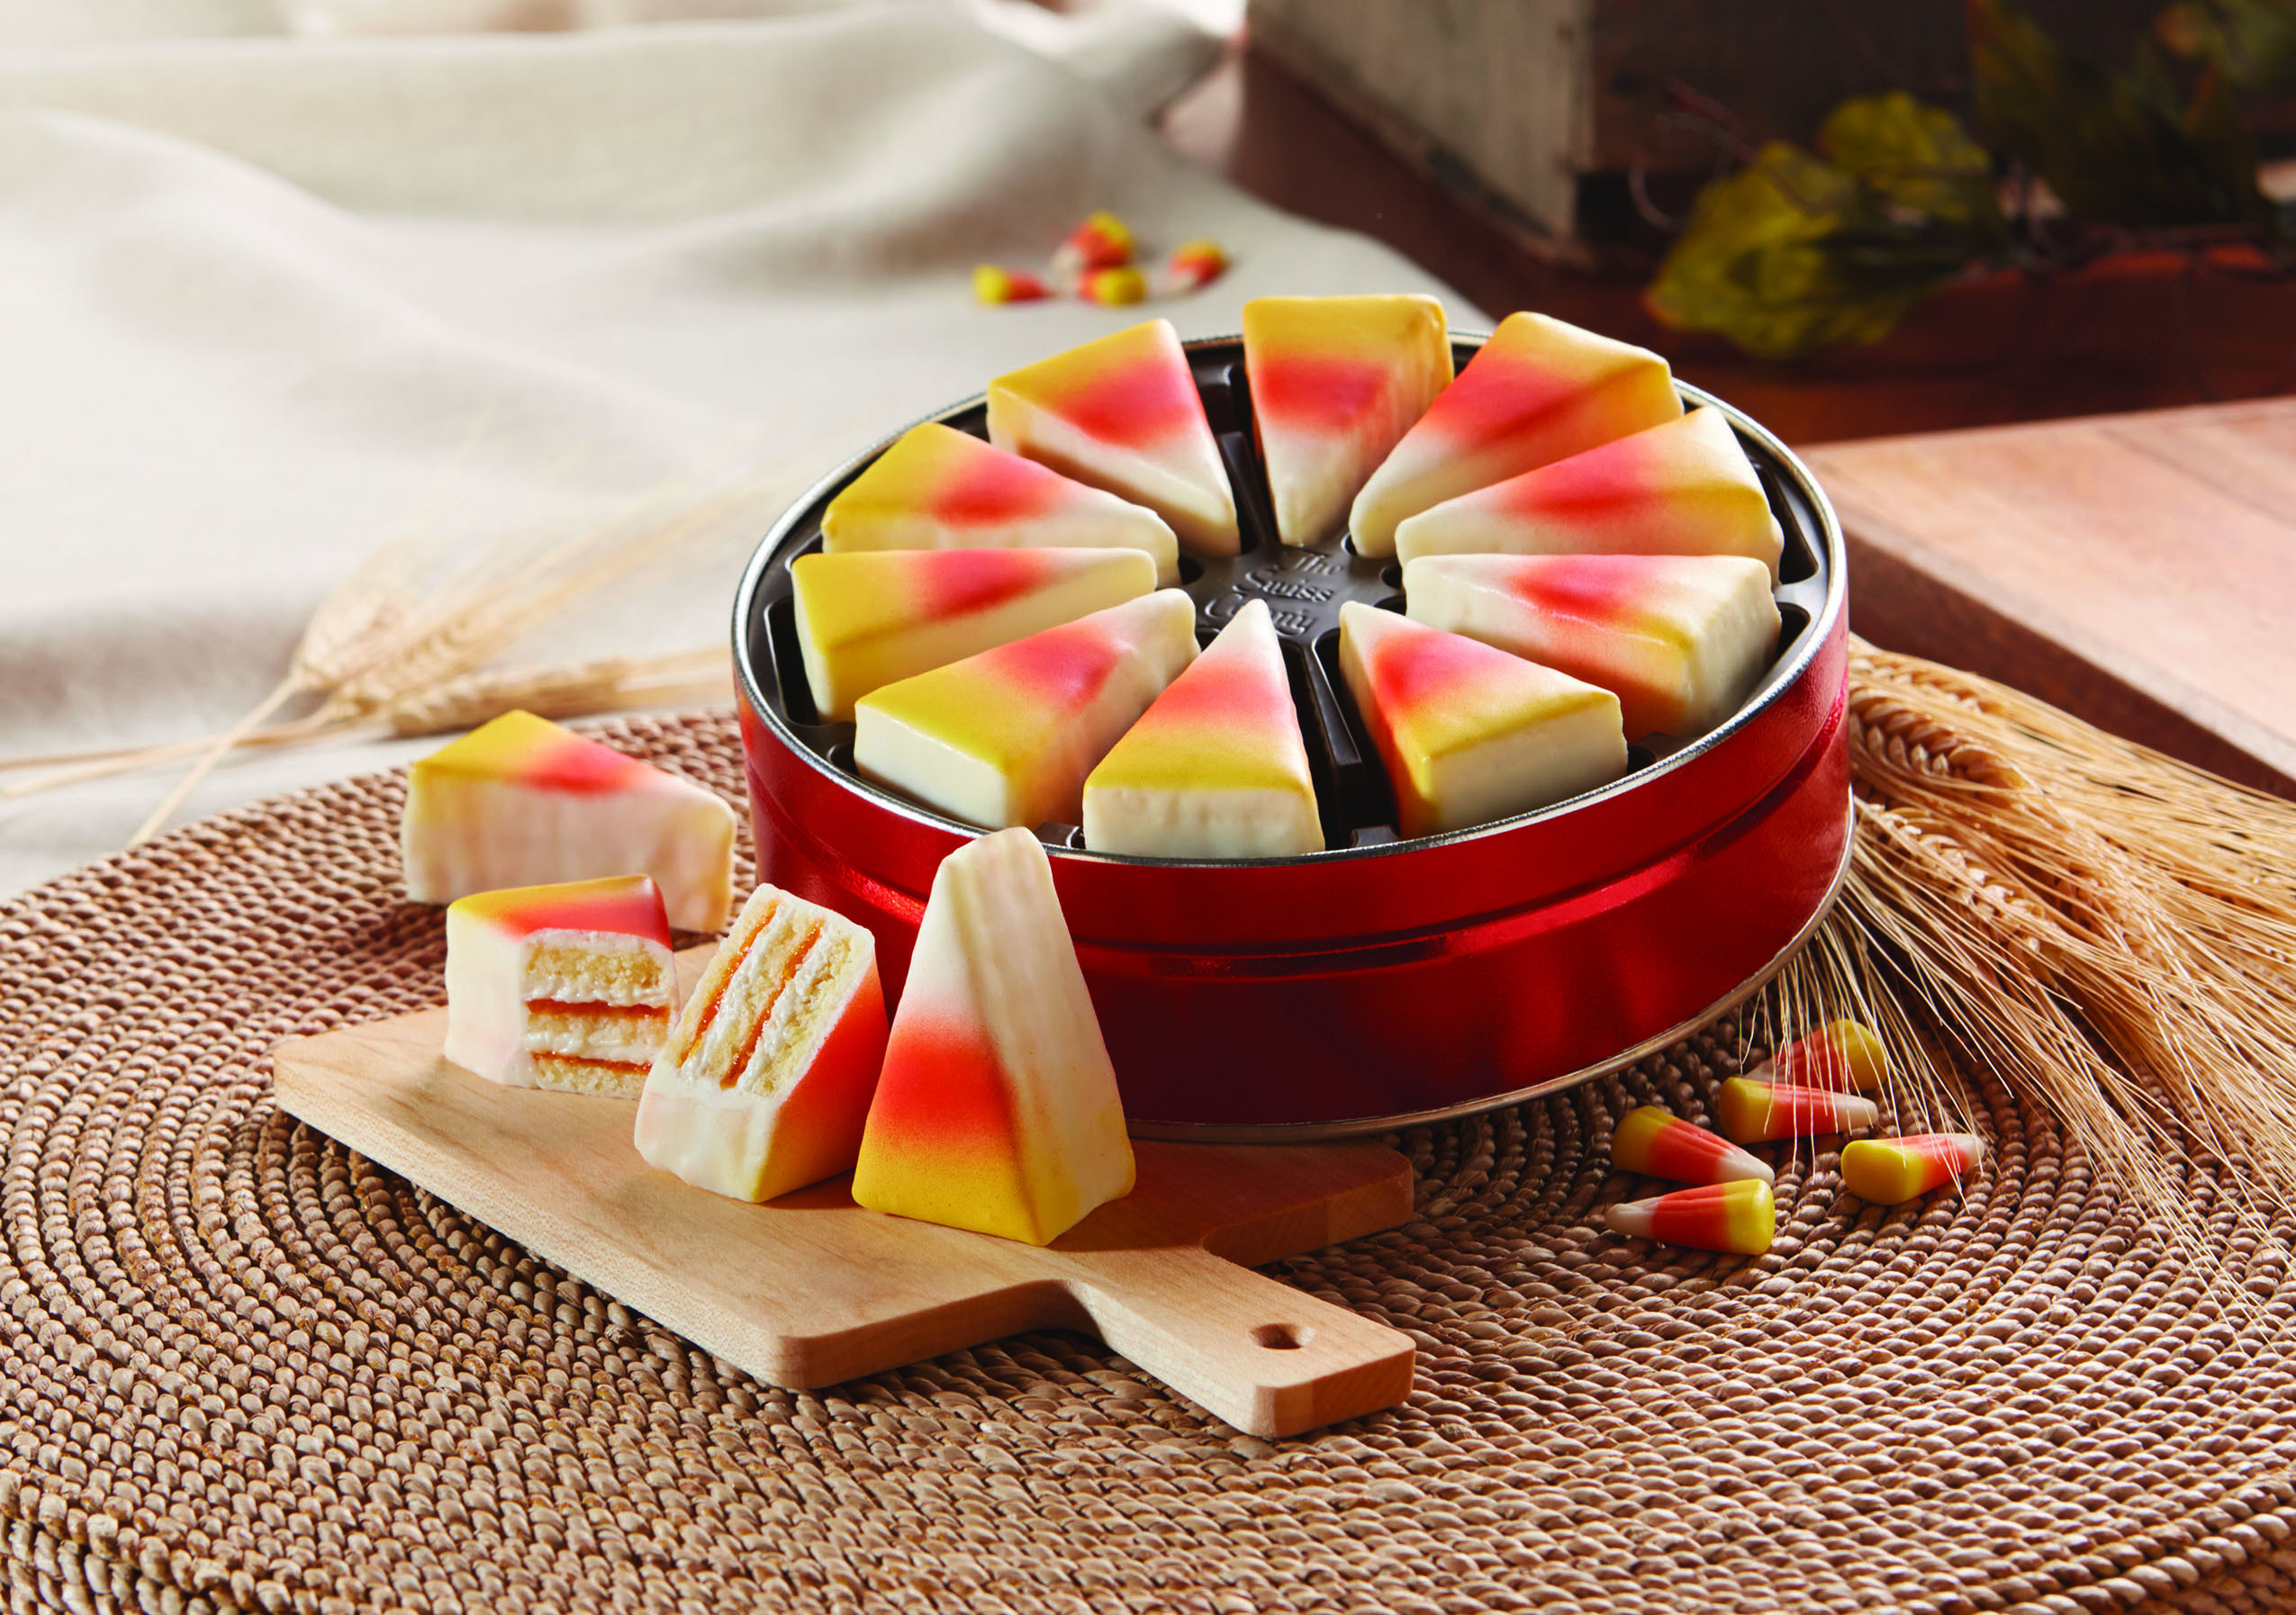 Mini Fall Desserts
 Plan a Halloween Party with Festive Fall Desserts from The